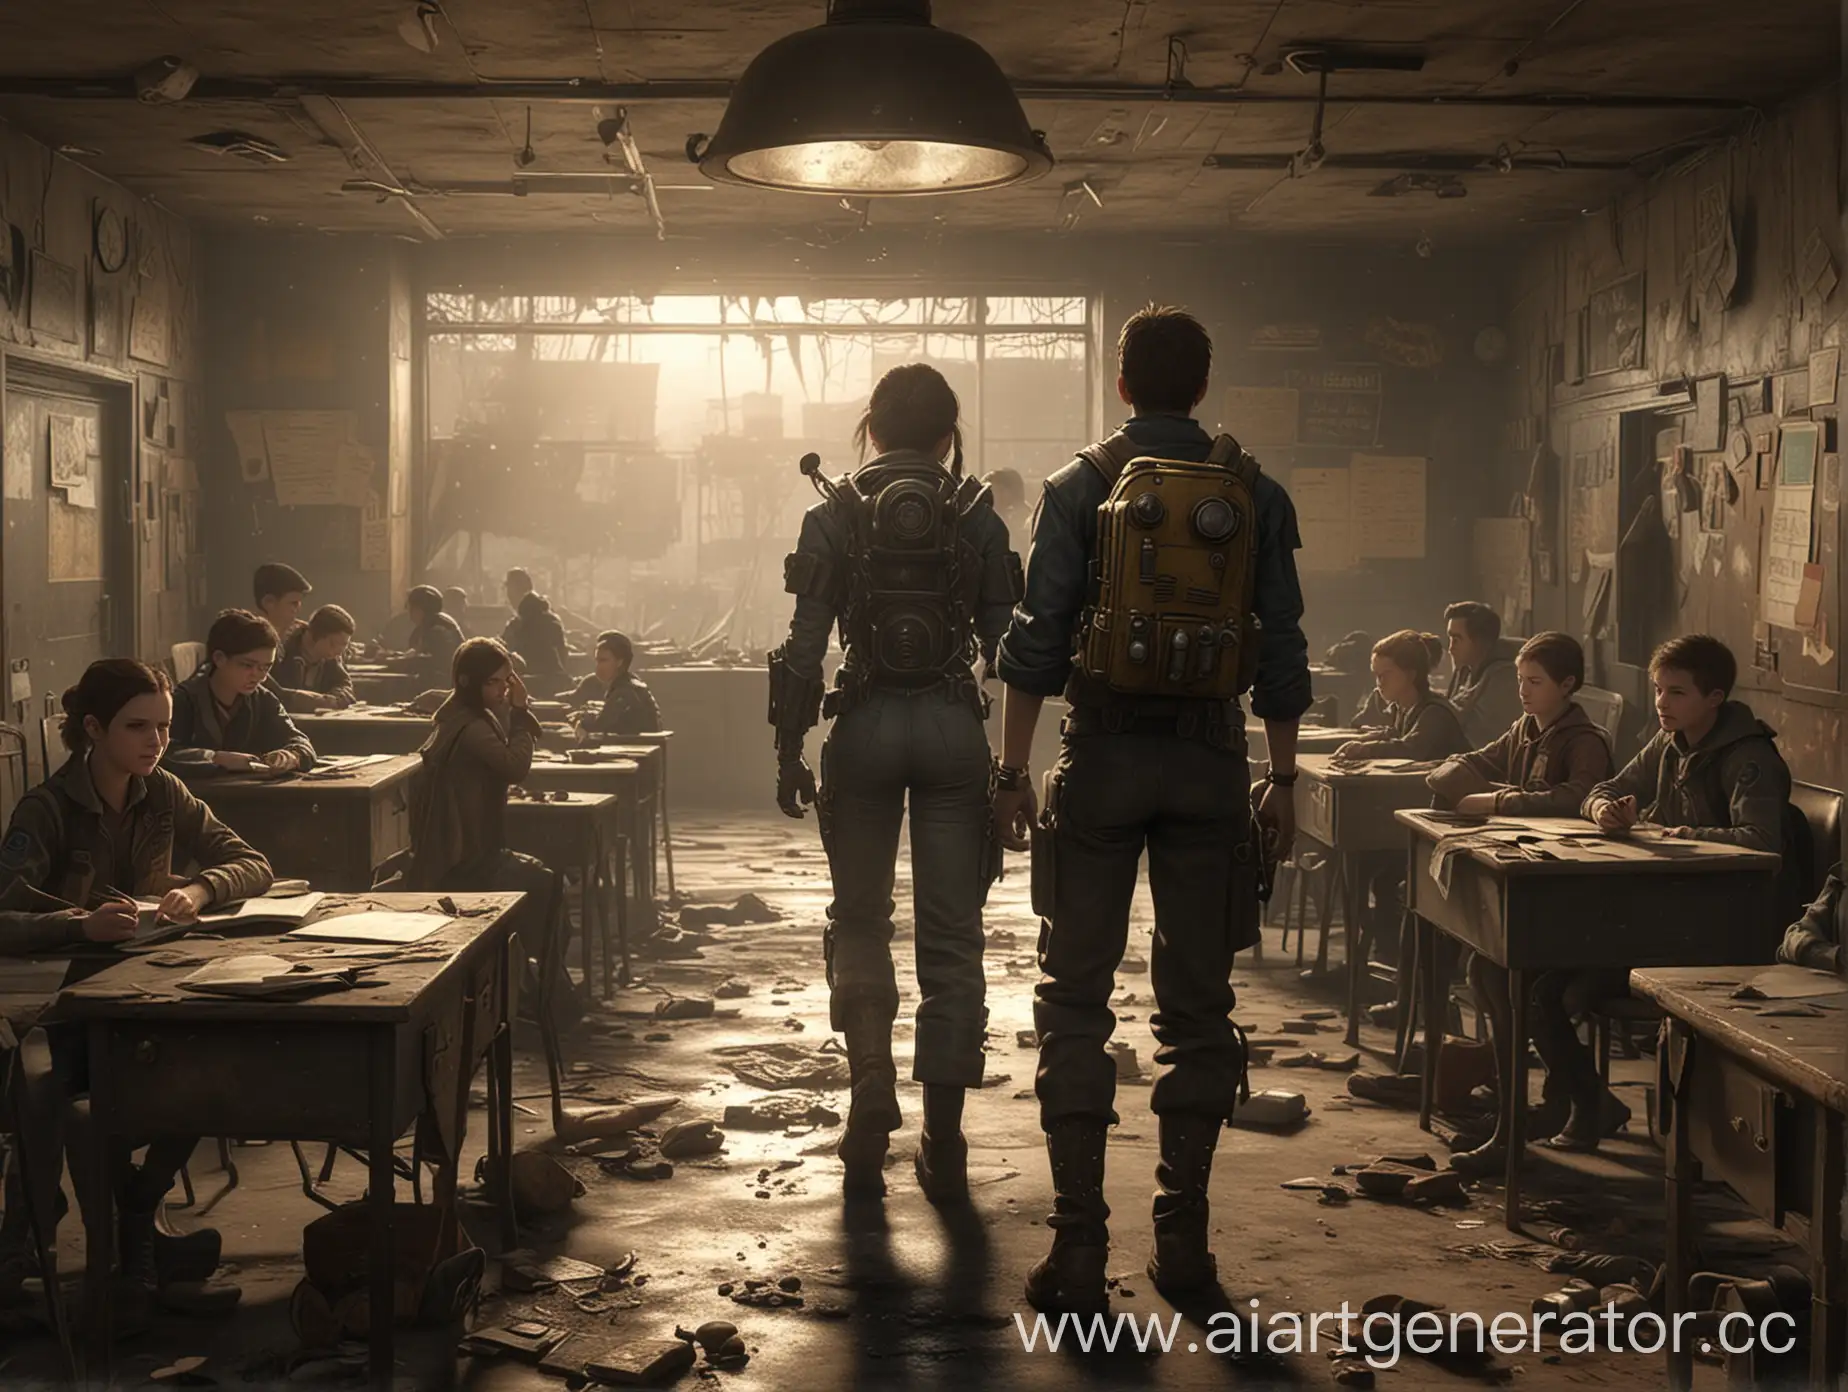 PostApocalyptic-School-Farewell-Last-Bell-Ringing-in-the-Fallout-Universe